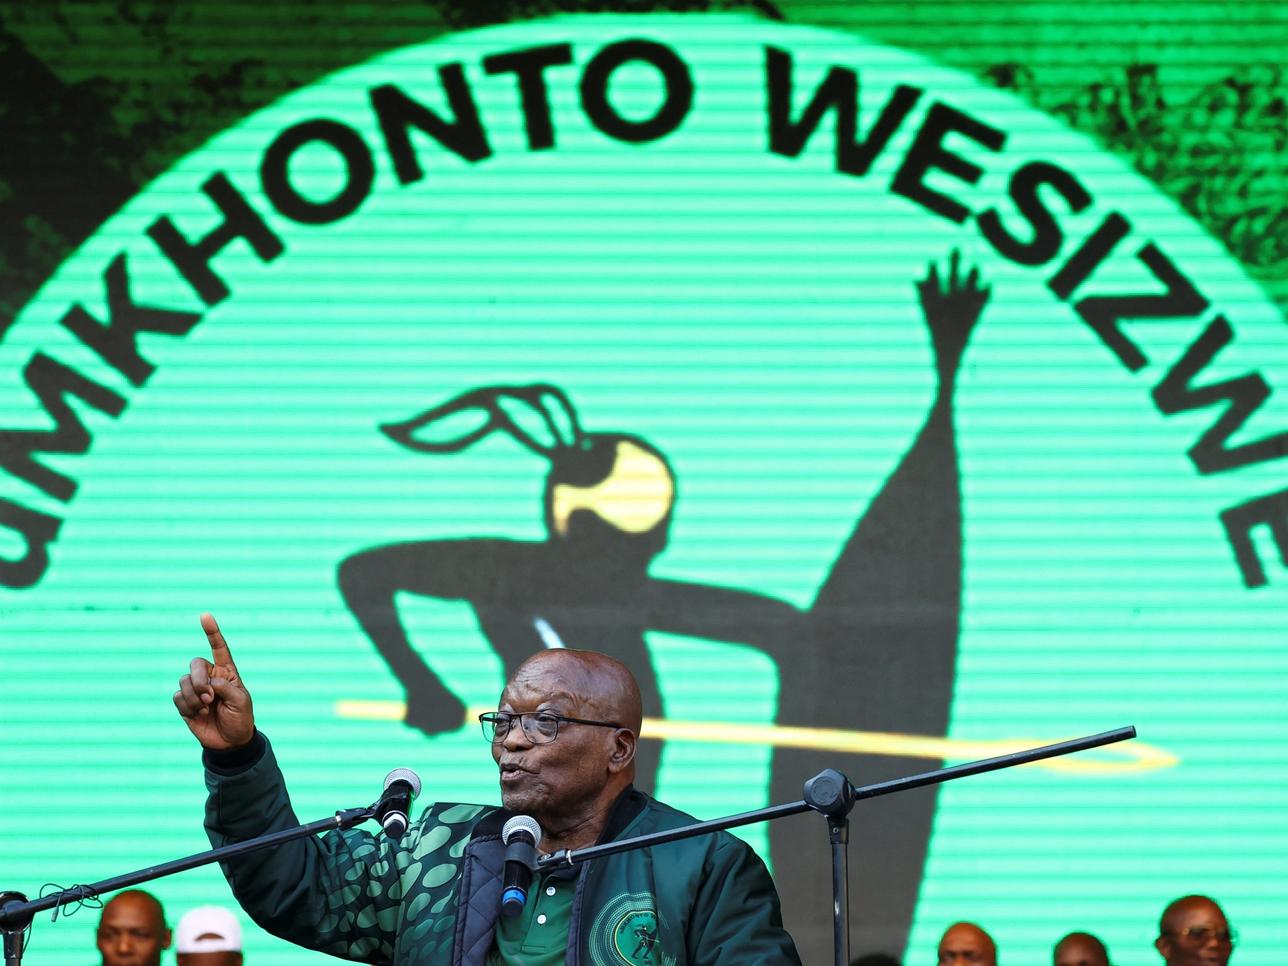 Former South African President Jacob Zuma speaks to his suppoters during the launch of the election manifesto of his new political party, uMkhonto we Sizwe, ahead of a general election on May 29, at a rally in Soweto, South Africa, May 18, 2024. REUTERS/Siphiwe Sibeko